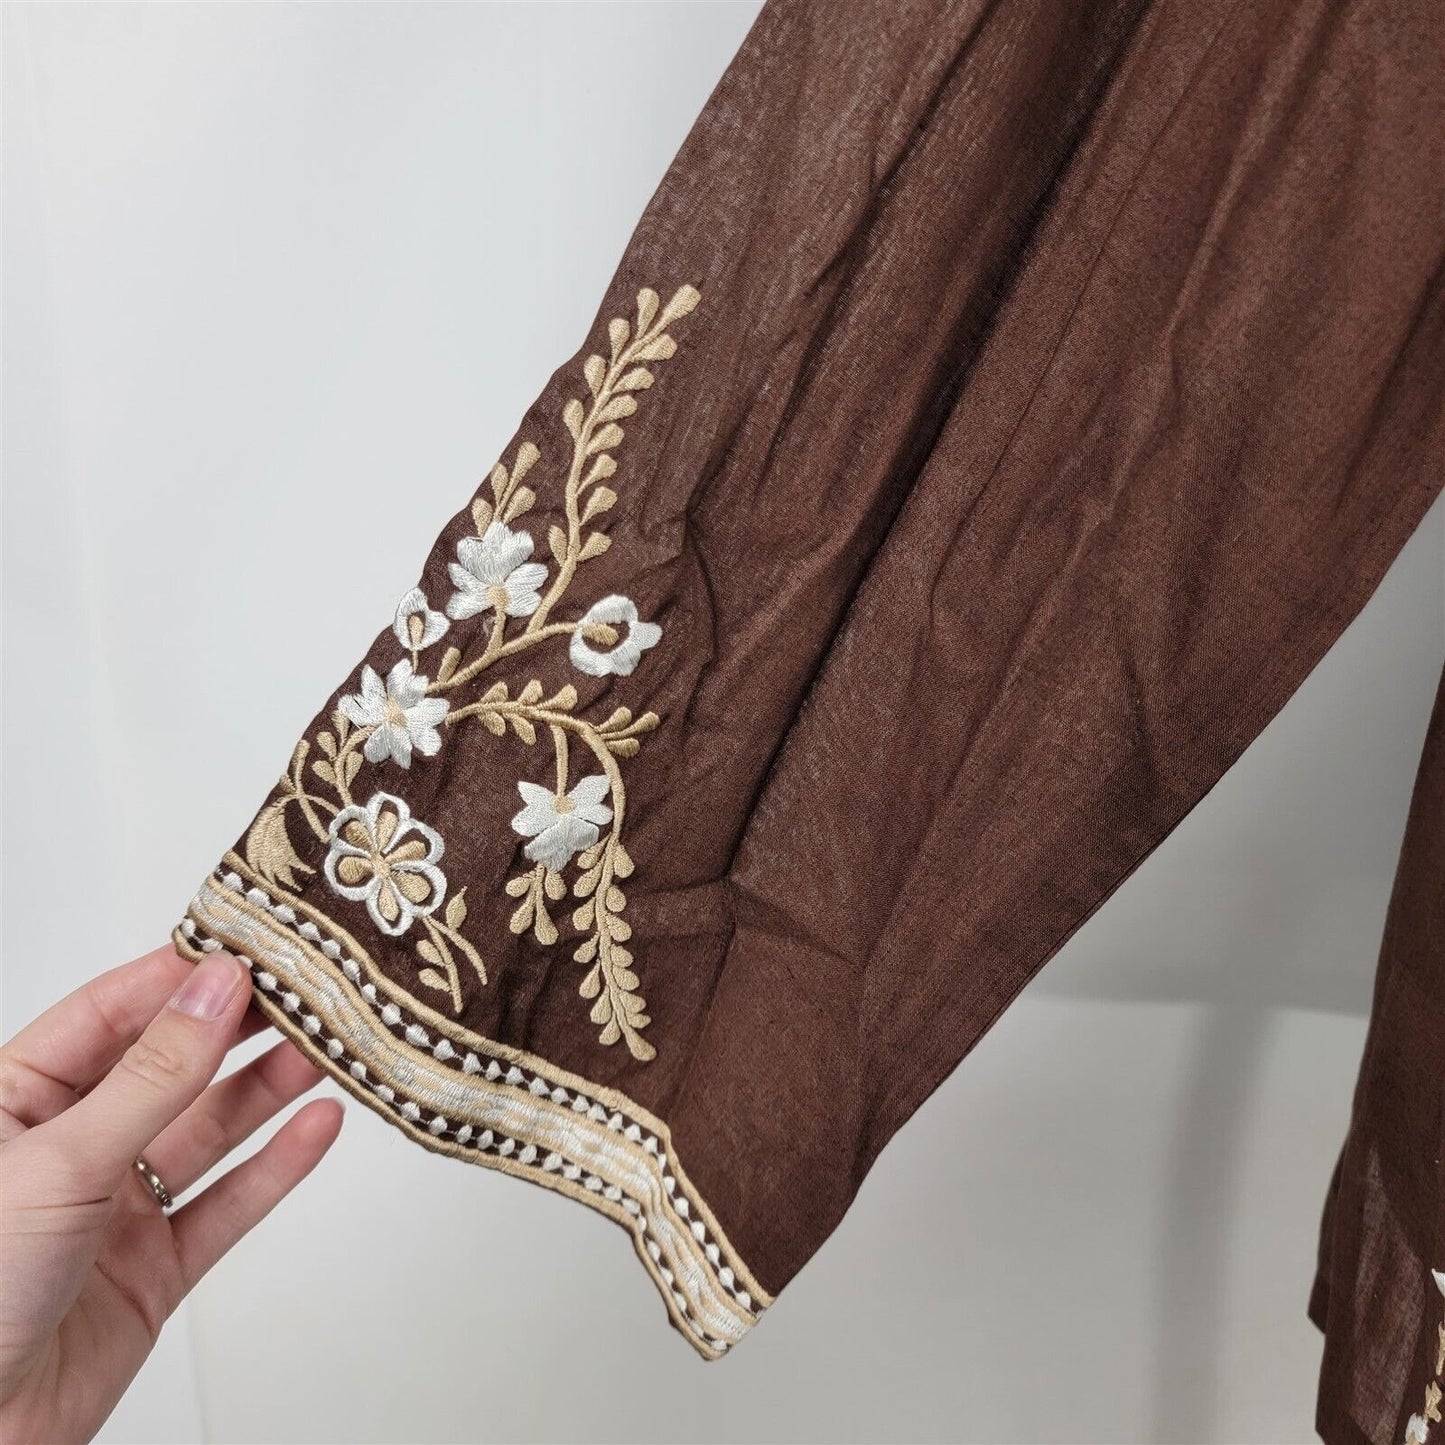 Vintage 1970s Brown Floral Embroidered Long Sleeve Blouse Womens L